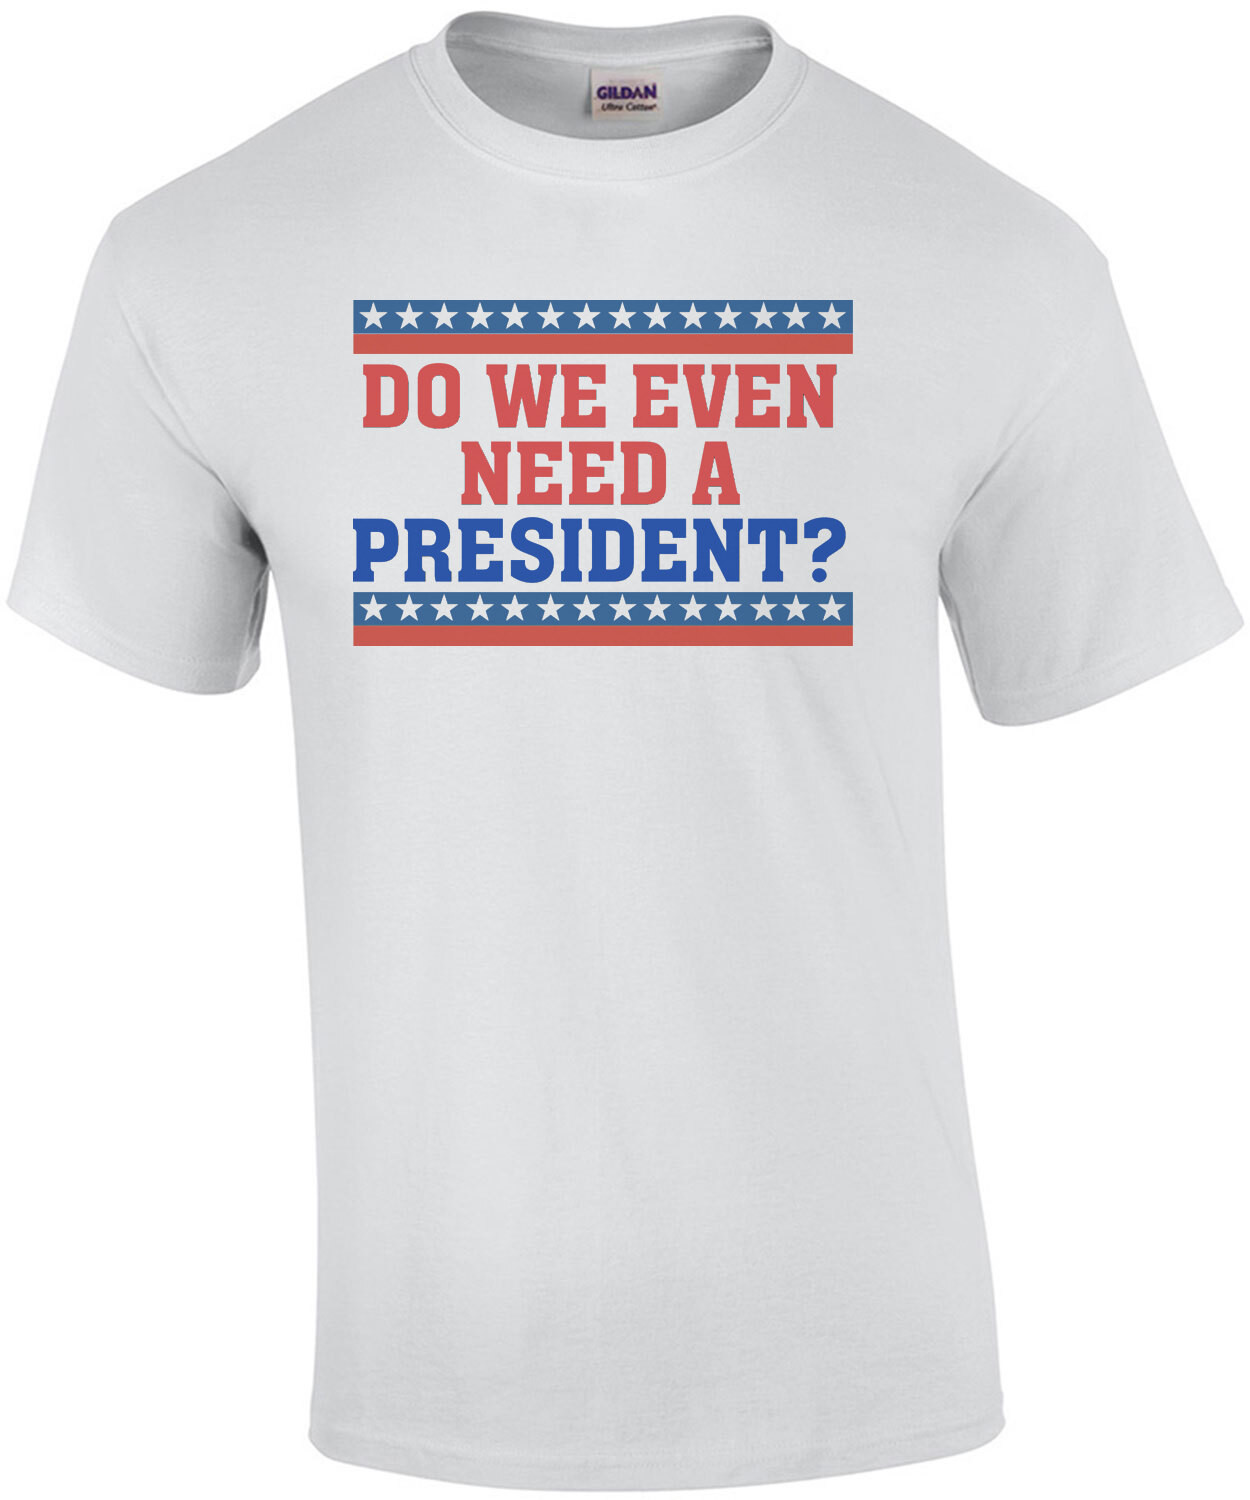 Do we even need a president? Funny political t-shirt